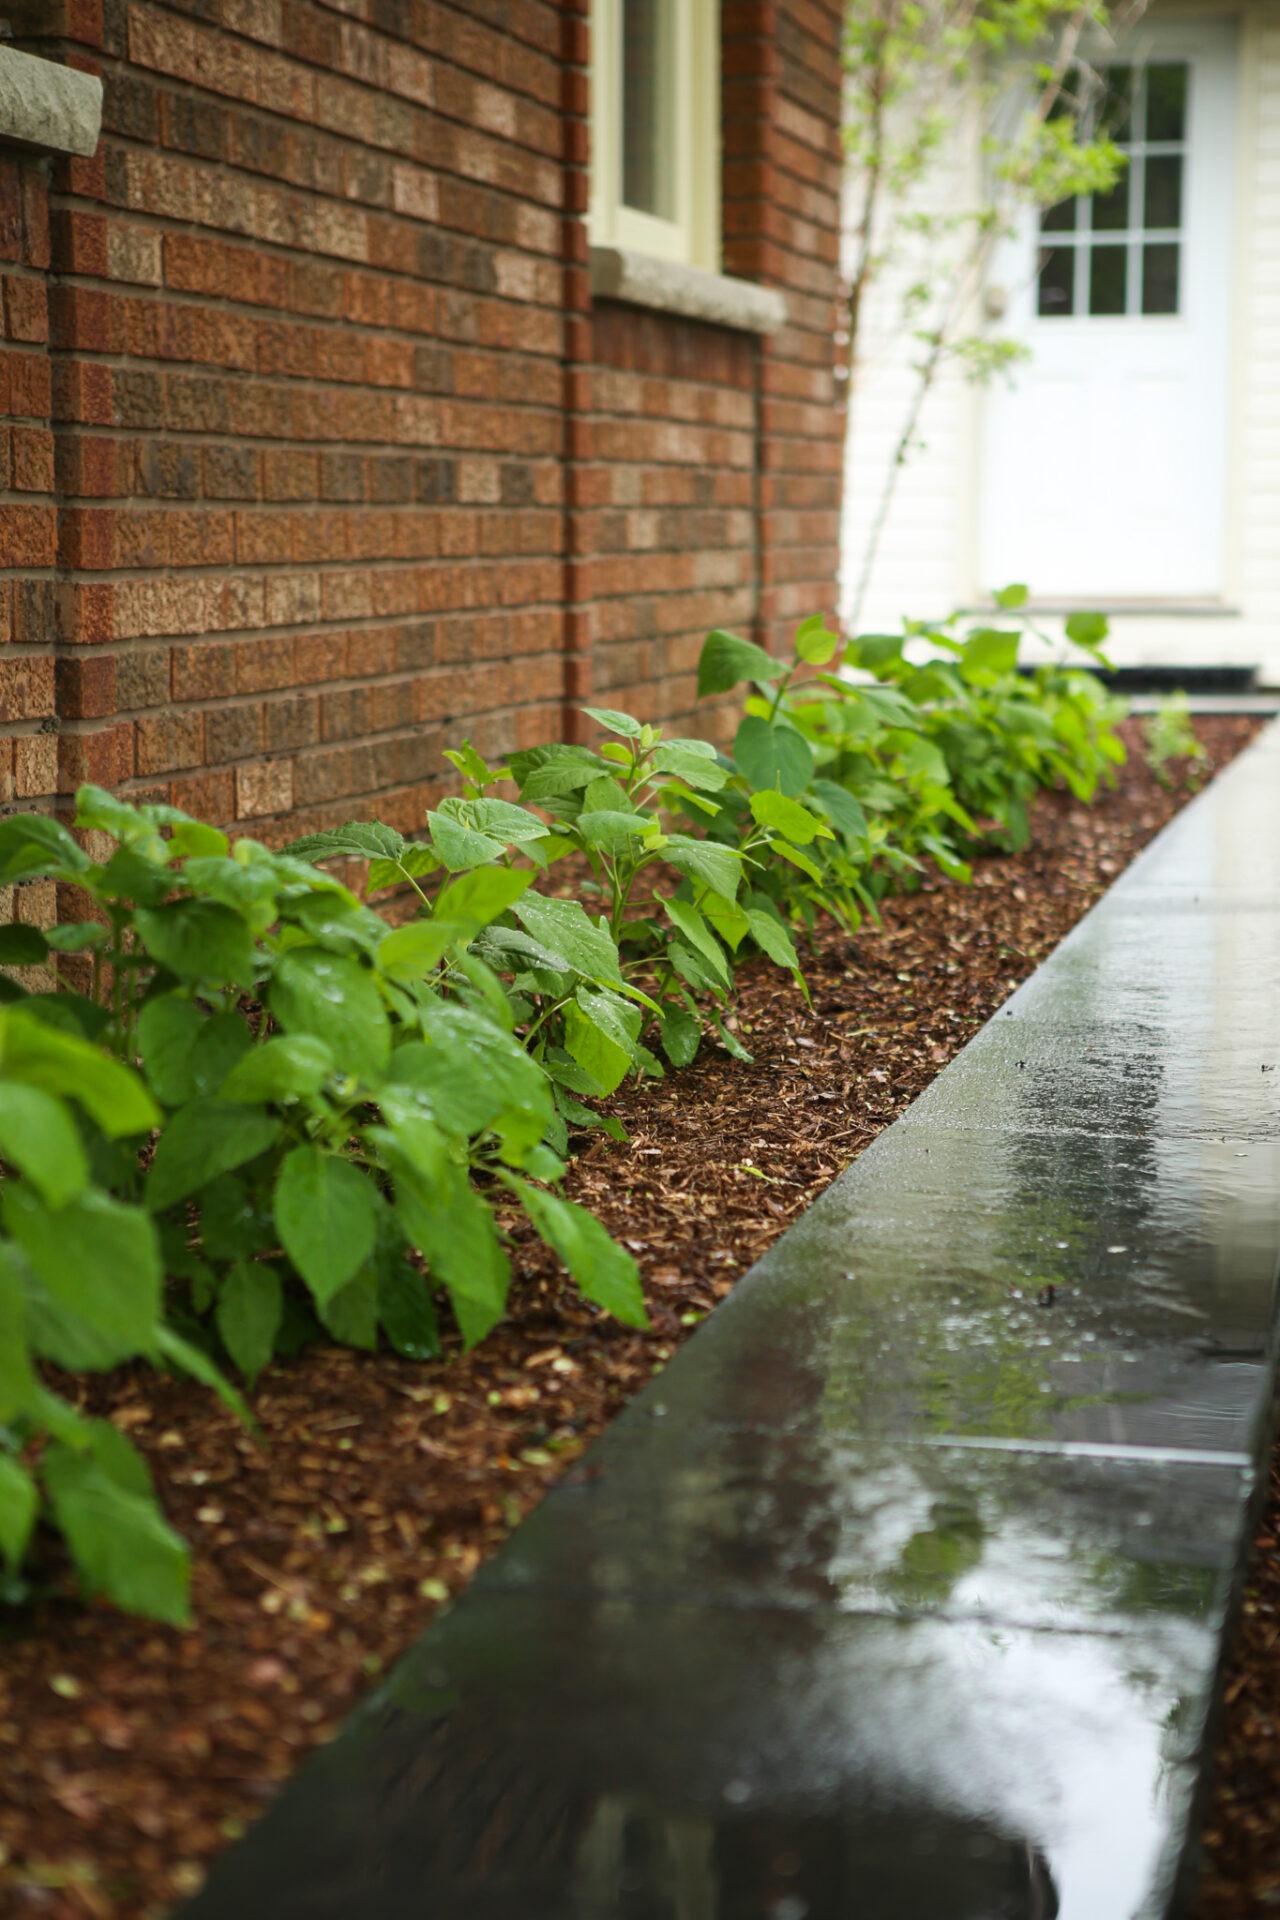 A wet pathway beside a brick house lined with green shrubbery and mulch, reflecting a serene setting after rainfall.